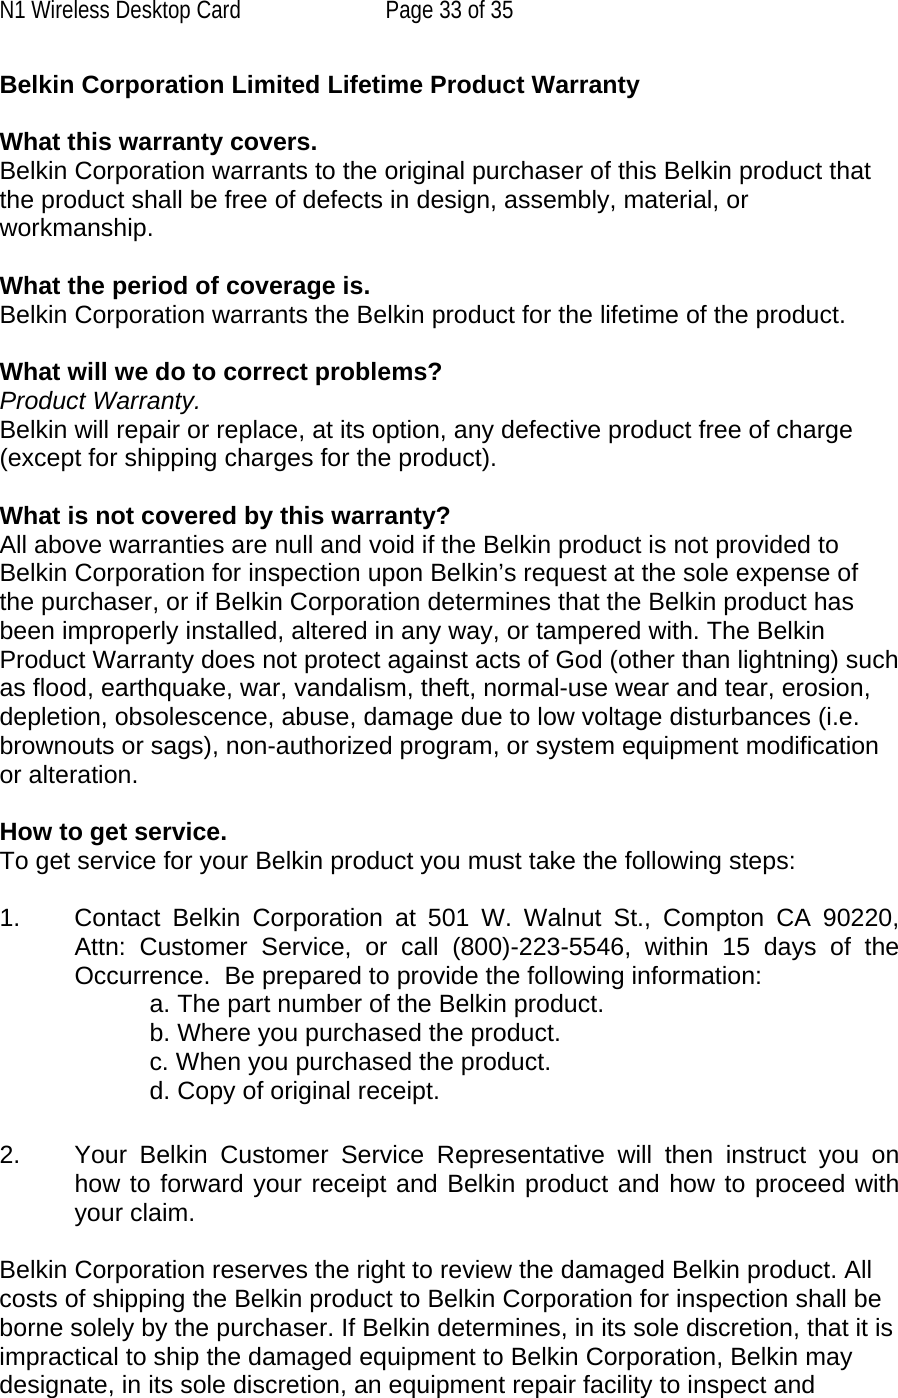 N1 Wireless Desktop Card  Page 33 of 35 Belkin Corporation Limited Lifetime Product Warranty  What this warranty covers. Belkin Corporation warrants to the original purchaser of this Belkin product that the product shall be free of defects in design, assembly, material, or workmanship.   What the period of coverage is. Belkin Corporation warrants the Belkin product for the lifetime of the product.  What will we do to correct problems?  Product Warranty. Belkin will repair or replace, at its option, any defective product free of charge (except for shipping charges for the product).    What is not covered by this warranty? All above warranties are null and void if the Belkin product is not provided to Belkin Corporation for inspection upon Belkin’s request at the sole expense of the purchaser, or if Belkin Corporation determines that the Belkin product has been improperly installed, altered in any way, or tampered with. The Belkin Product Warranty does not protect against acts of God (other than lightning) such as flood, earthquake, war, vandalism, theft, normal-use wear and tear, erosion, depletion, obsolescence, abuse, damage due to low voltage disturbances (i.e. brownouts or sags), non-authorized program, or system equipment modification or alteration.  How to get service.    To get service for your Belkin product you must take the following steps:  1.  Contact Belkin Corporation at 501 W. Walnut St., Compton CA 90220, Attn: Customer Service, or call (800)-223-5546, within 15 days of the Occurrence.  Be prepared to provide the following information: a. The part number of the Belkin product. b. Where you purchased the product. c. When you purchased the product. d. Copy of original receipt.  2.  Your Belkin Customer Service Representative will then instruct you on how to forward your receipt and Belkin product and how to proceed with your claim.  Belkin Corporation reserves the right to review the damaged Belkin product. All costs of shipping the Belkin product to Belkin Corporation for inspection shall be borne solely by the purchaser. If Belkin determines, in its sole discretion, that it is impractical to ship the damaged equipment to Belkin Corporation, Belkin may designate, in its sole discretion, an equipment repair facility to inspect and 